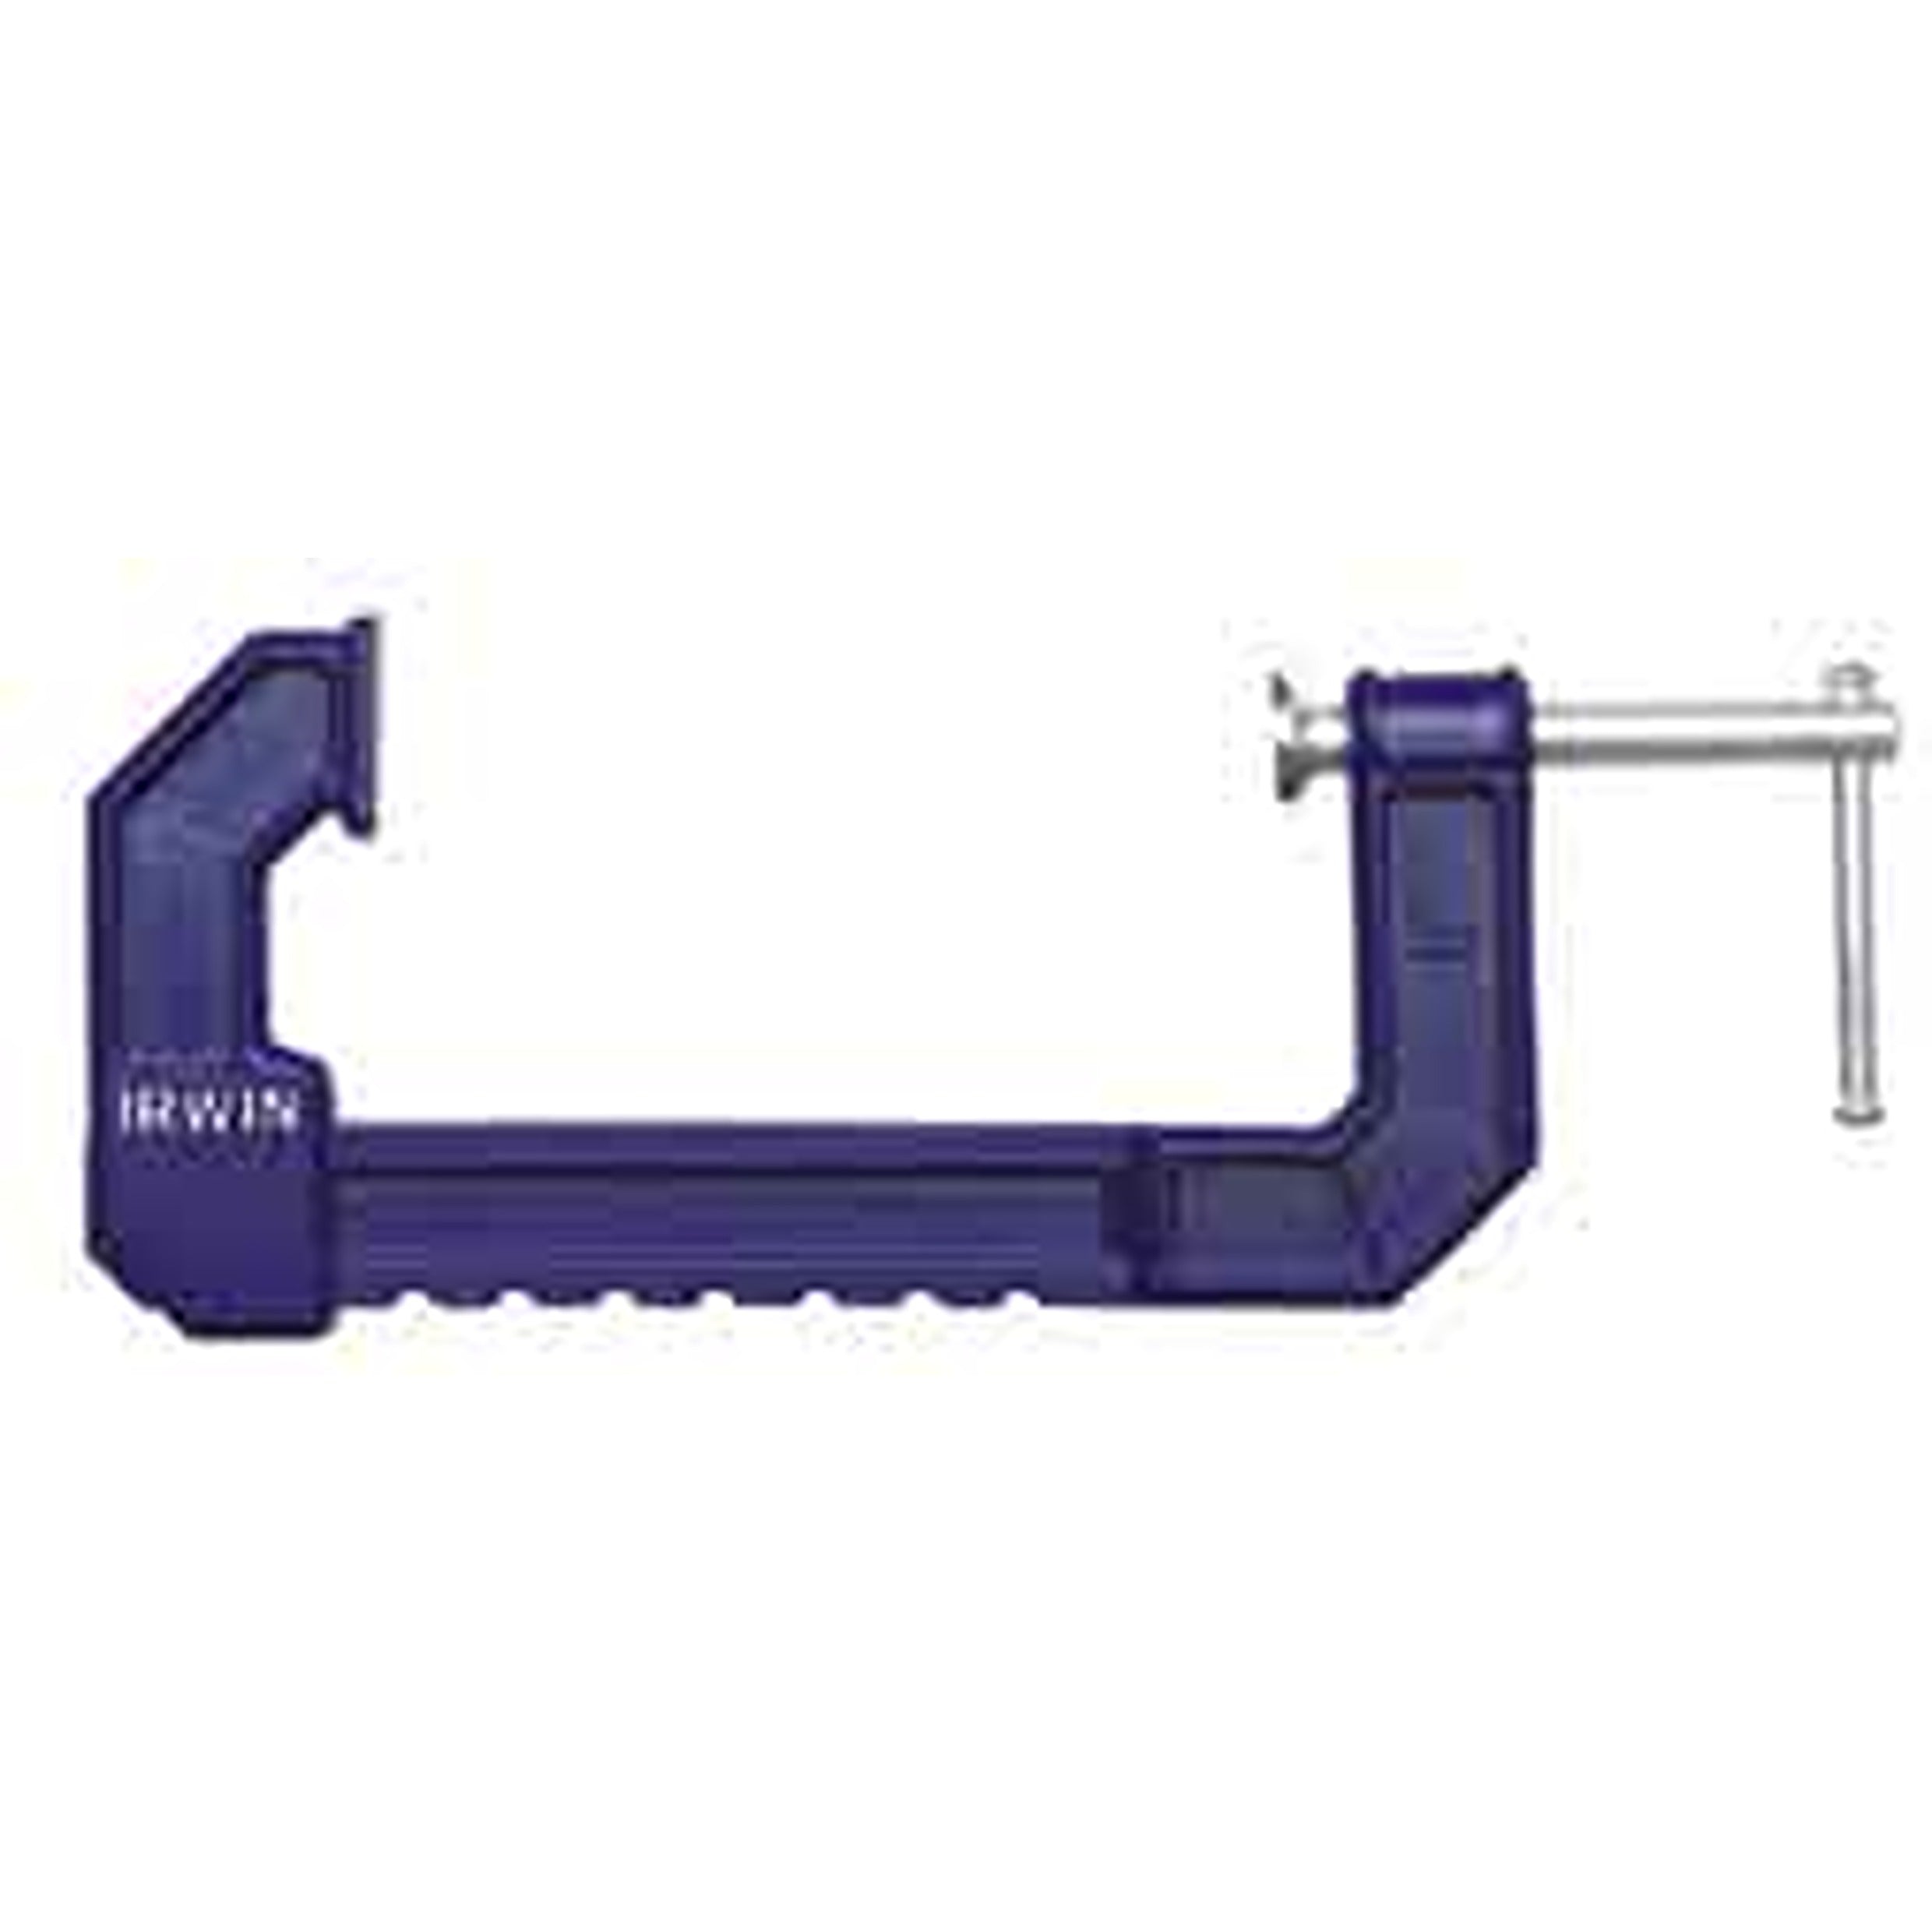 IRWIN 10504424 Quick Release G-Clamp Clamping Depth 100mm - Premium G-Clamp from IRWIN - Shop now at Yew Aik.